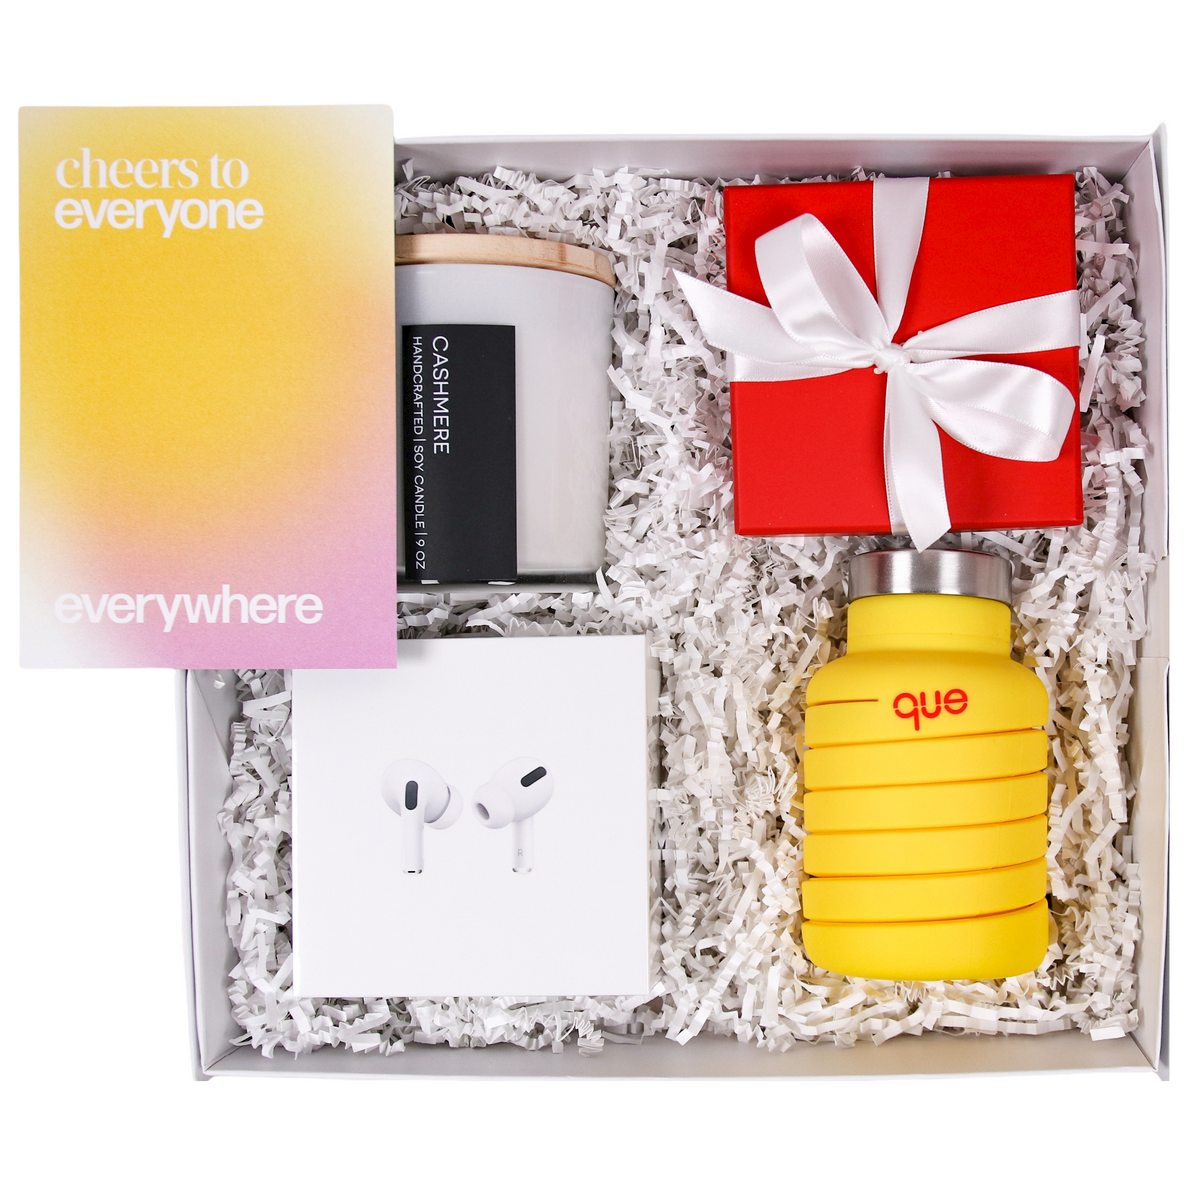 Cheers in a Box  Custom Gifting & Virtual Experiences